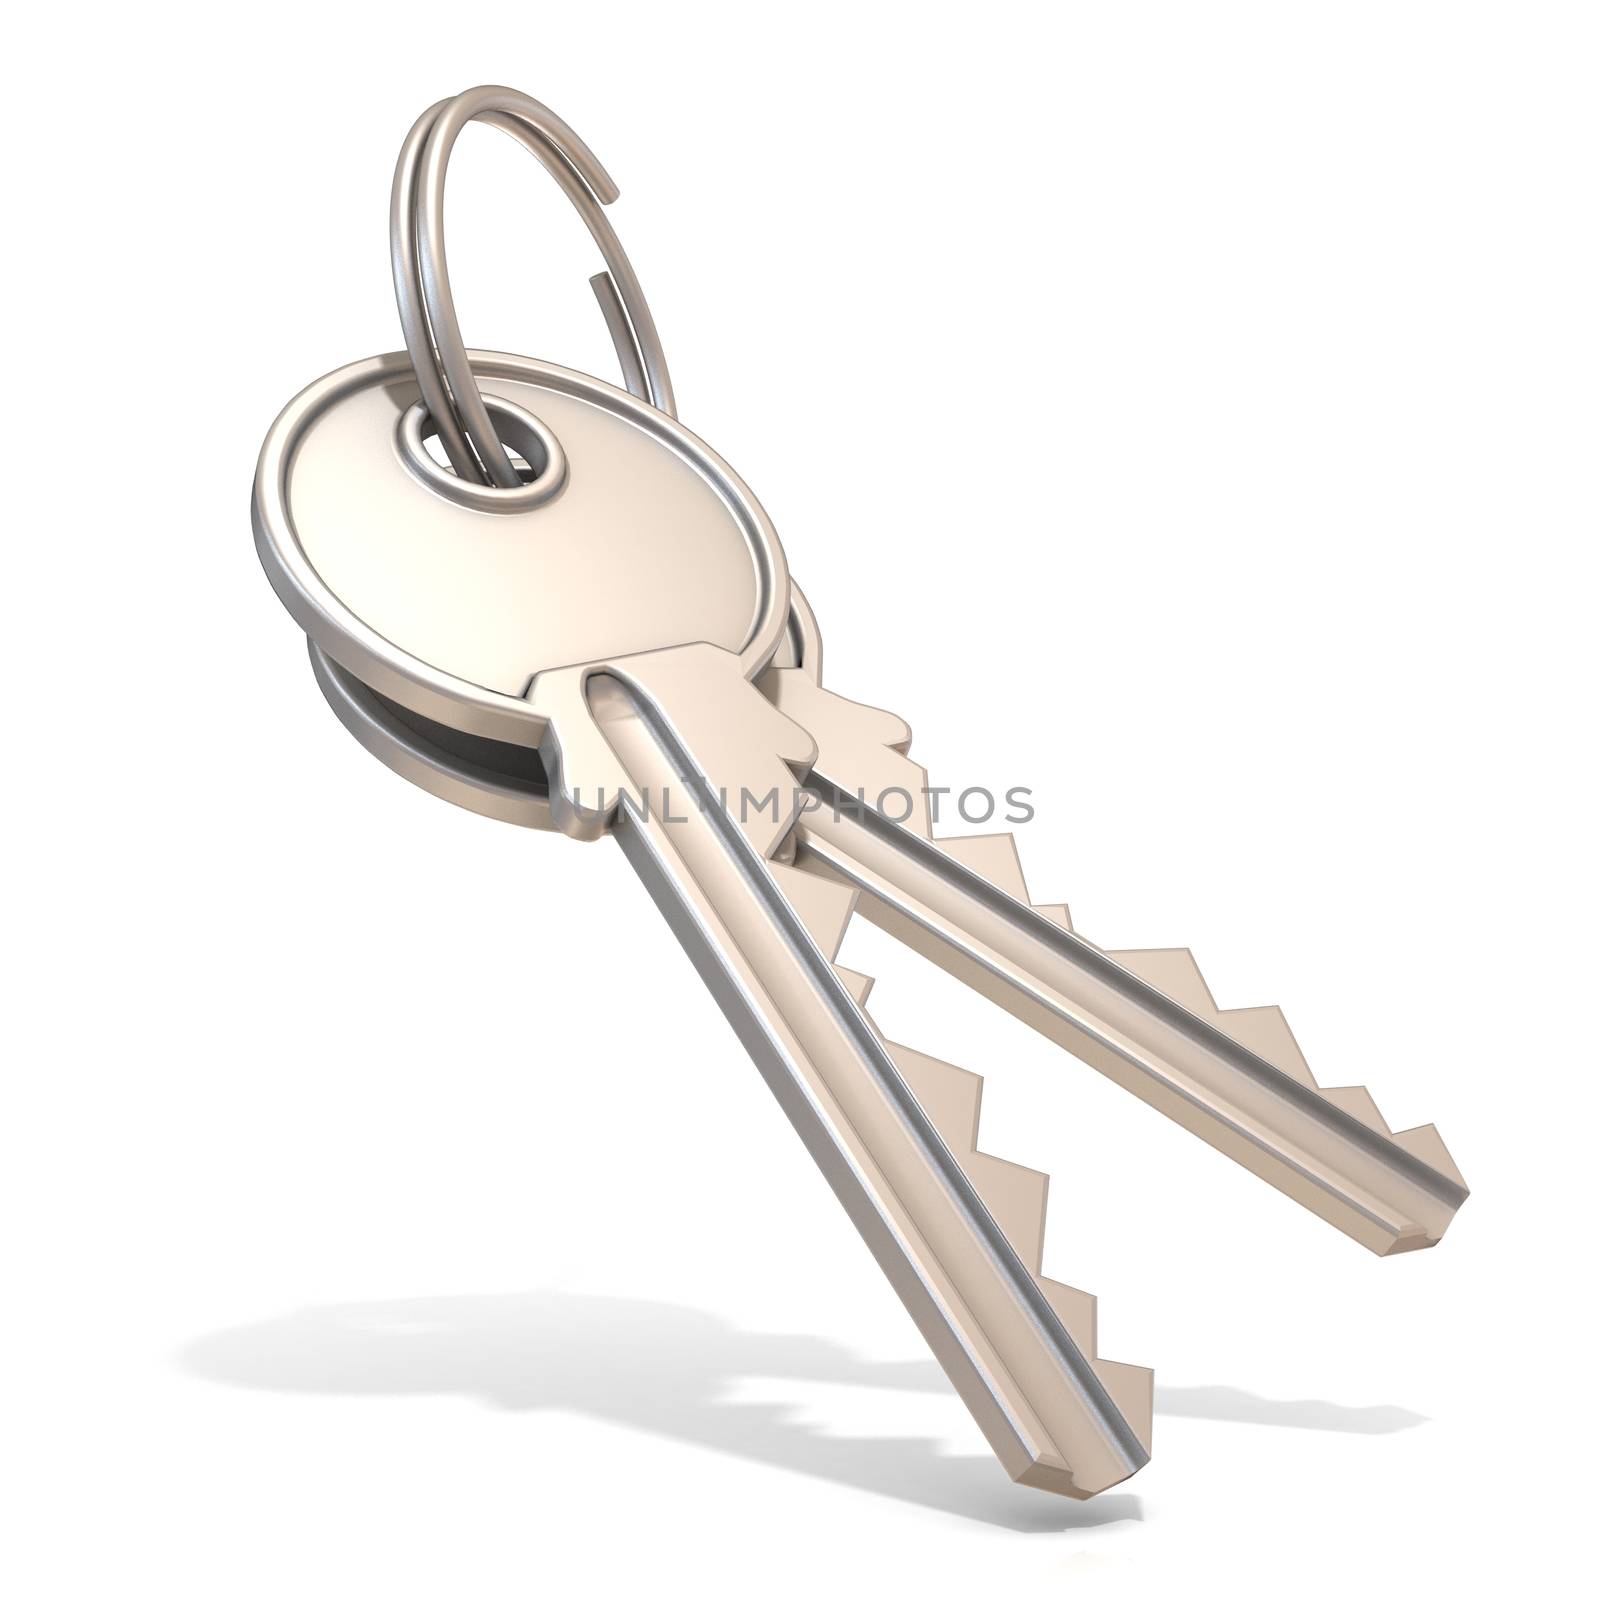 A pair of steel house keys isolated on white background